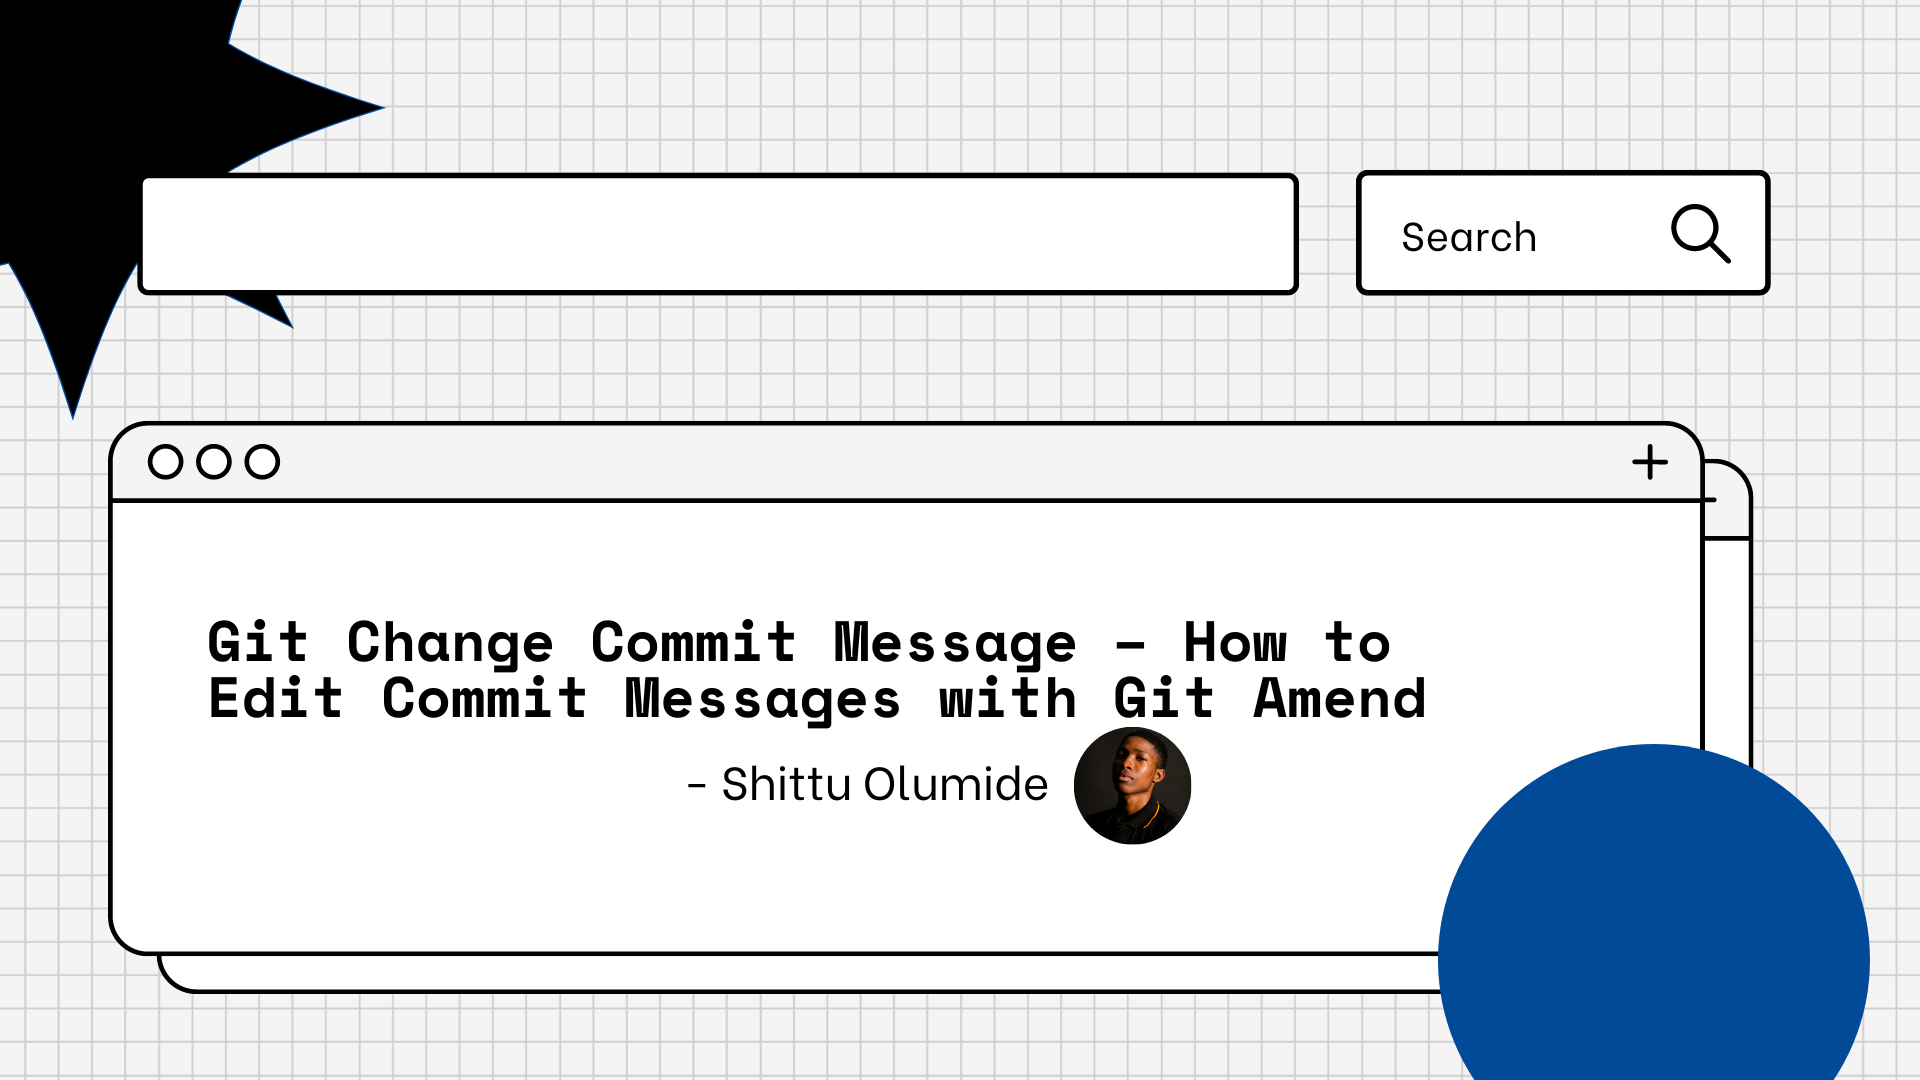 Git Change Commit Message – How to Edit Commit Messages with Git Amend